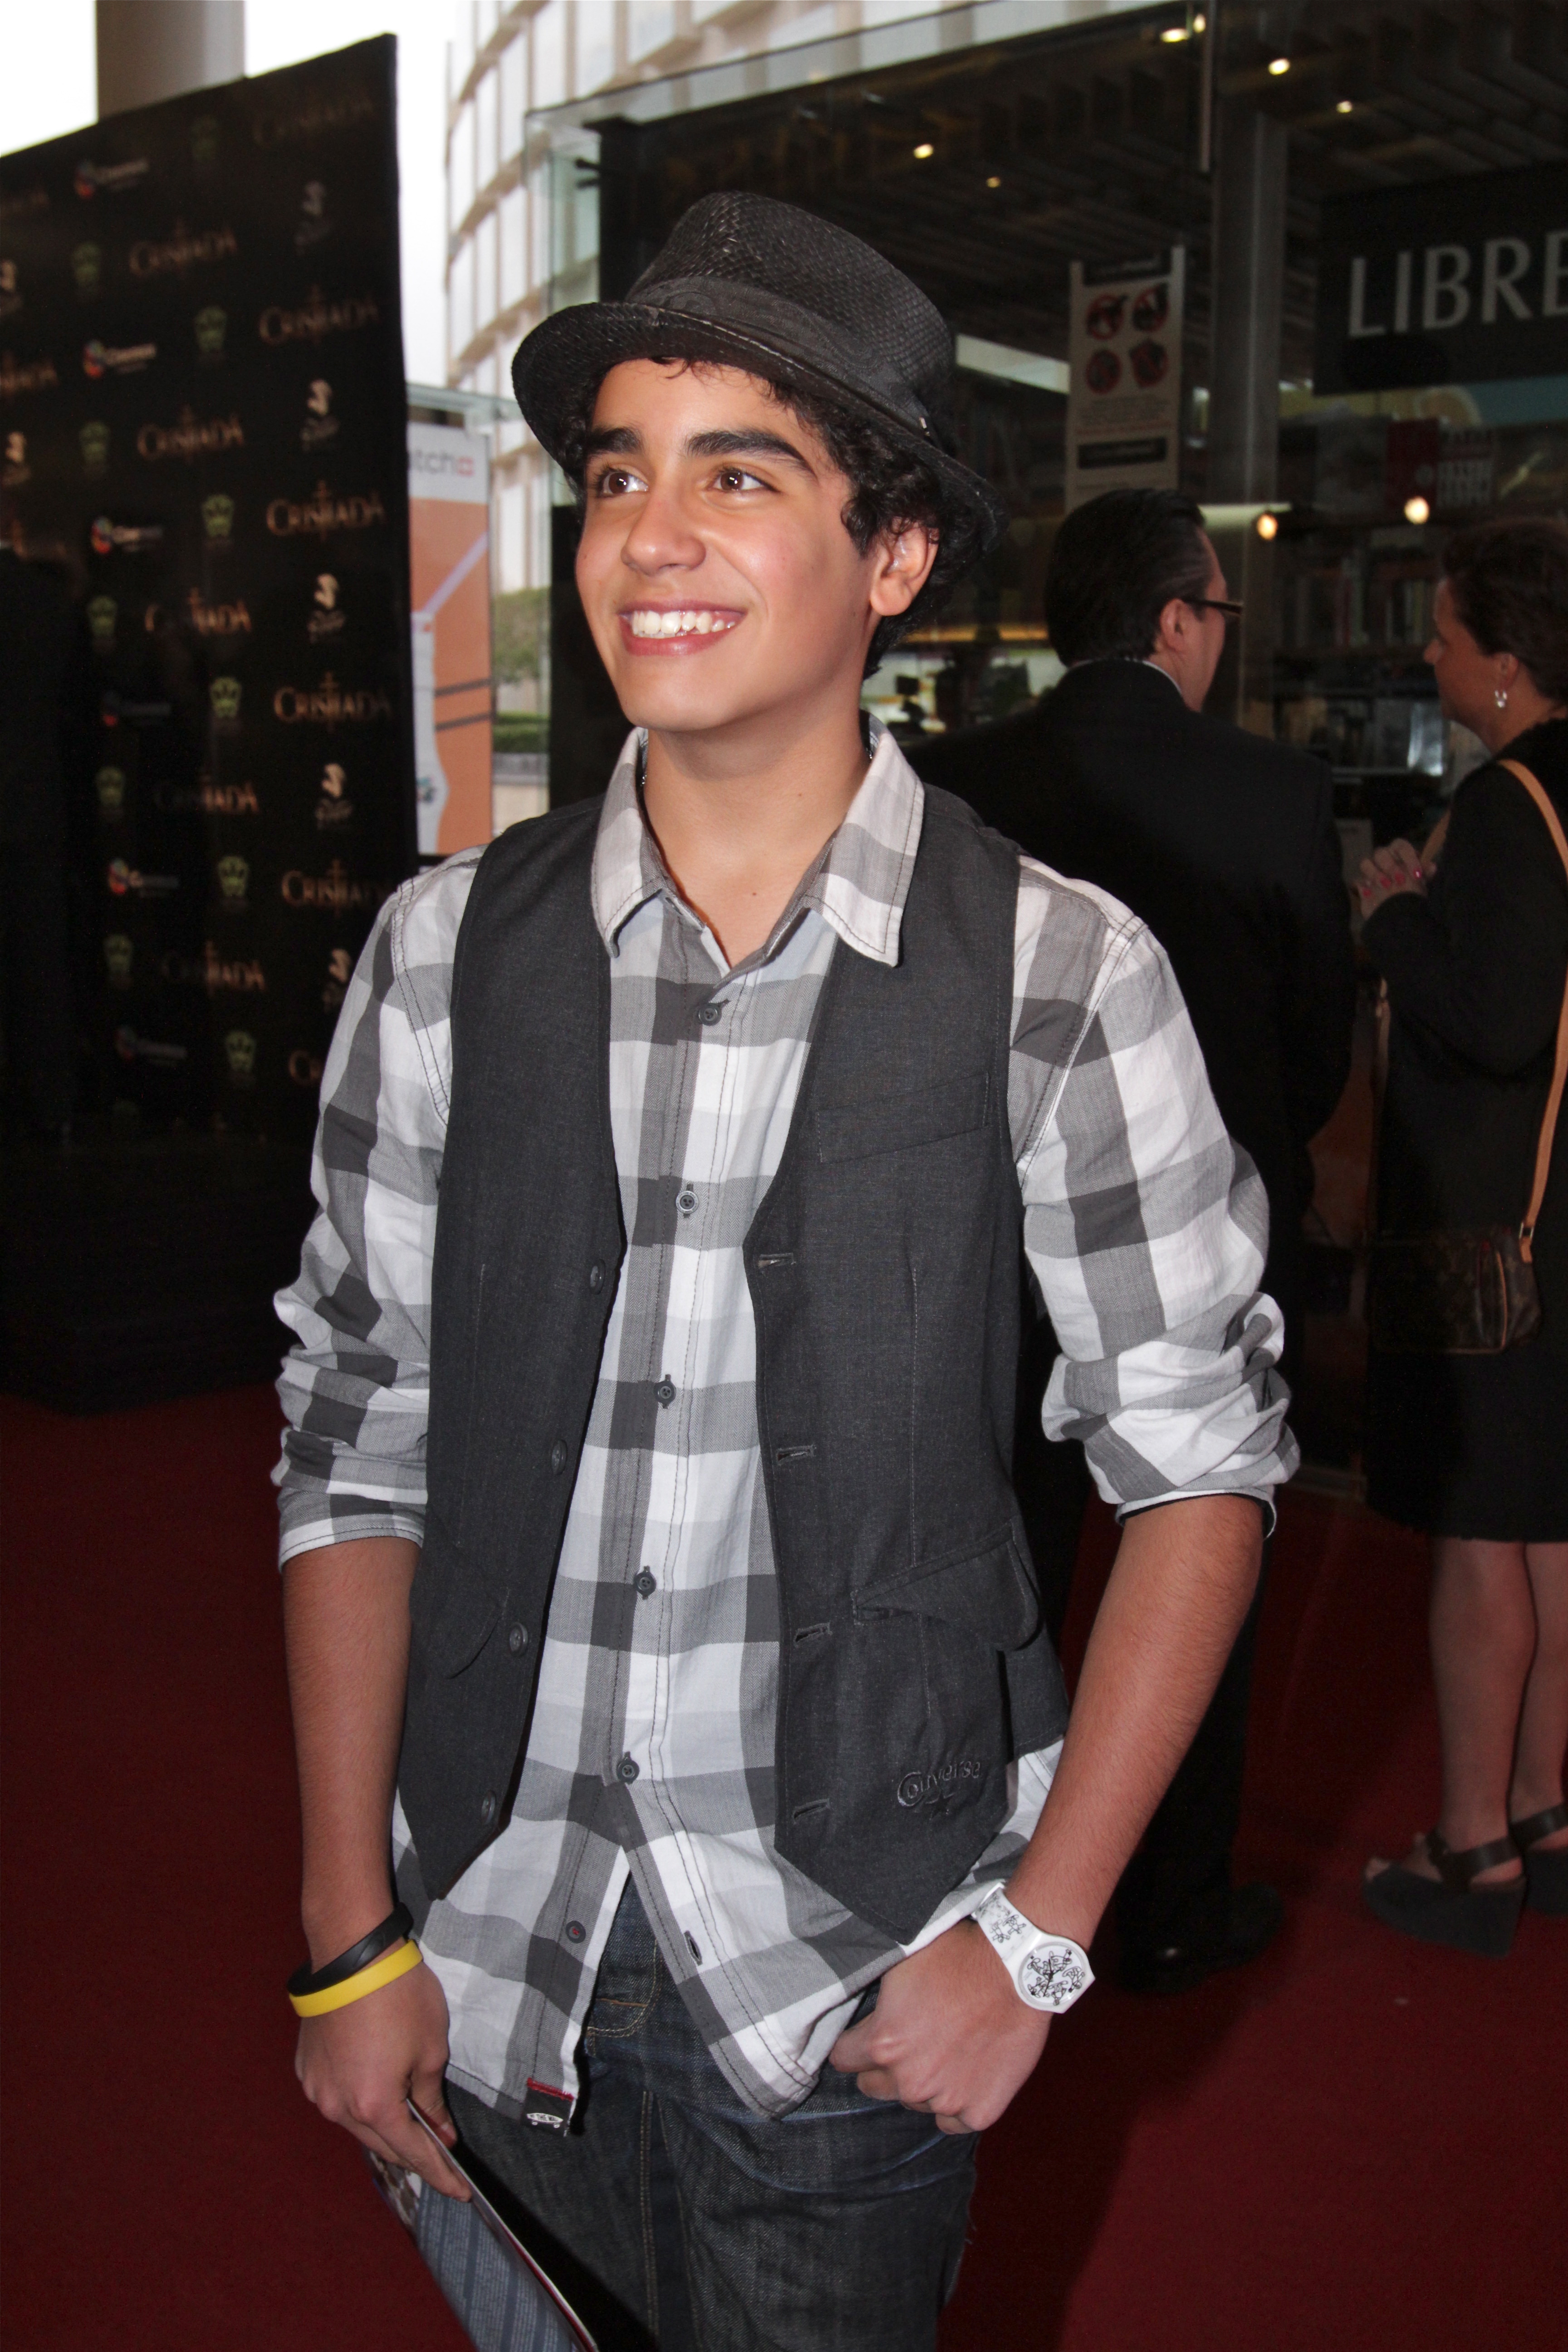 Mauricio at Red Carpet of Cristiada (For Greater Glory) in Mexico.